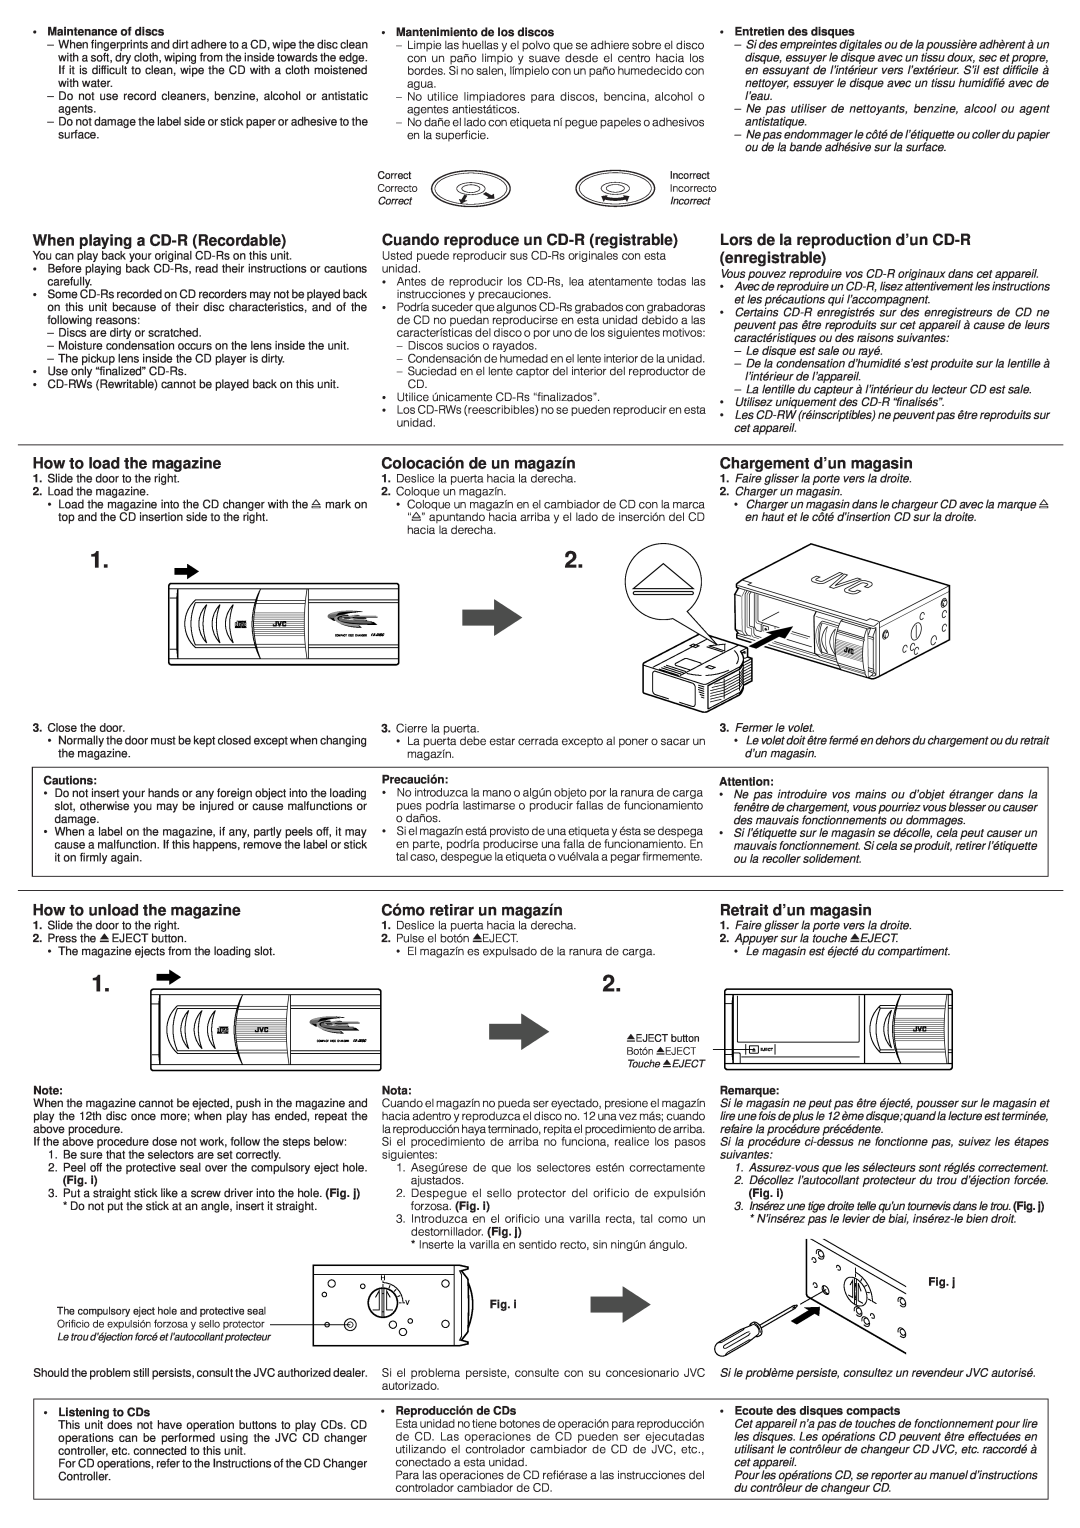 JVC CH-X350 user service When playing a CD-RRecordable, Cuando reproduce un CD-Rregistrable, How to load the magazine 